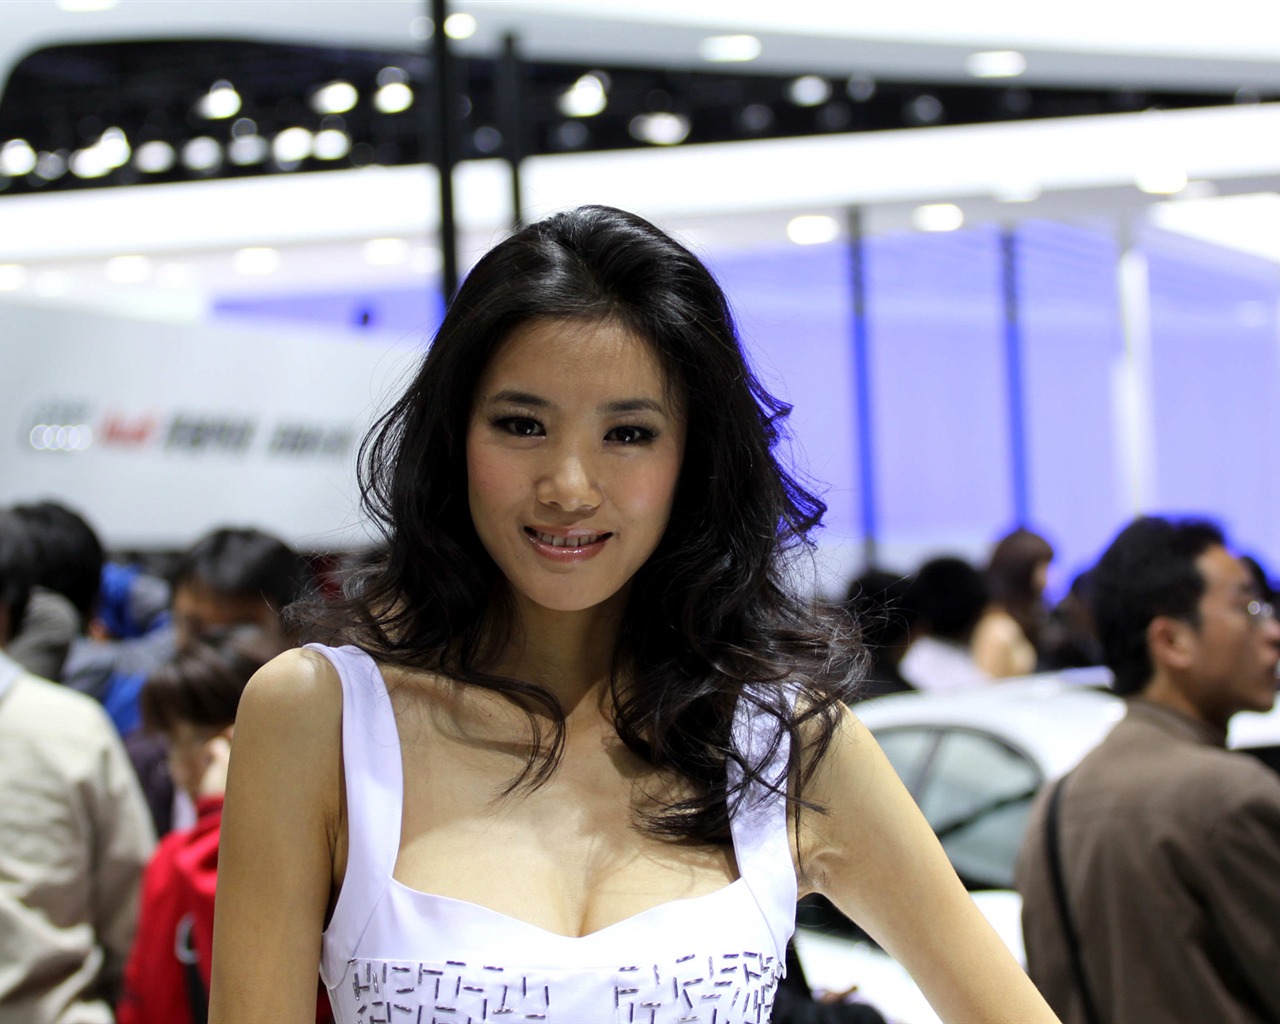 2010 Beijing Auto Show car models Collection (2) #4 - 1280x1024